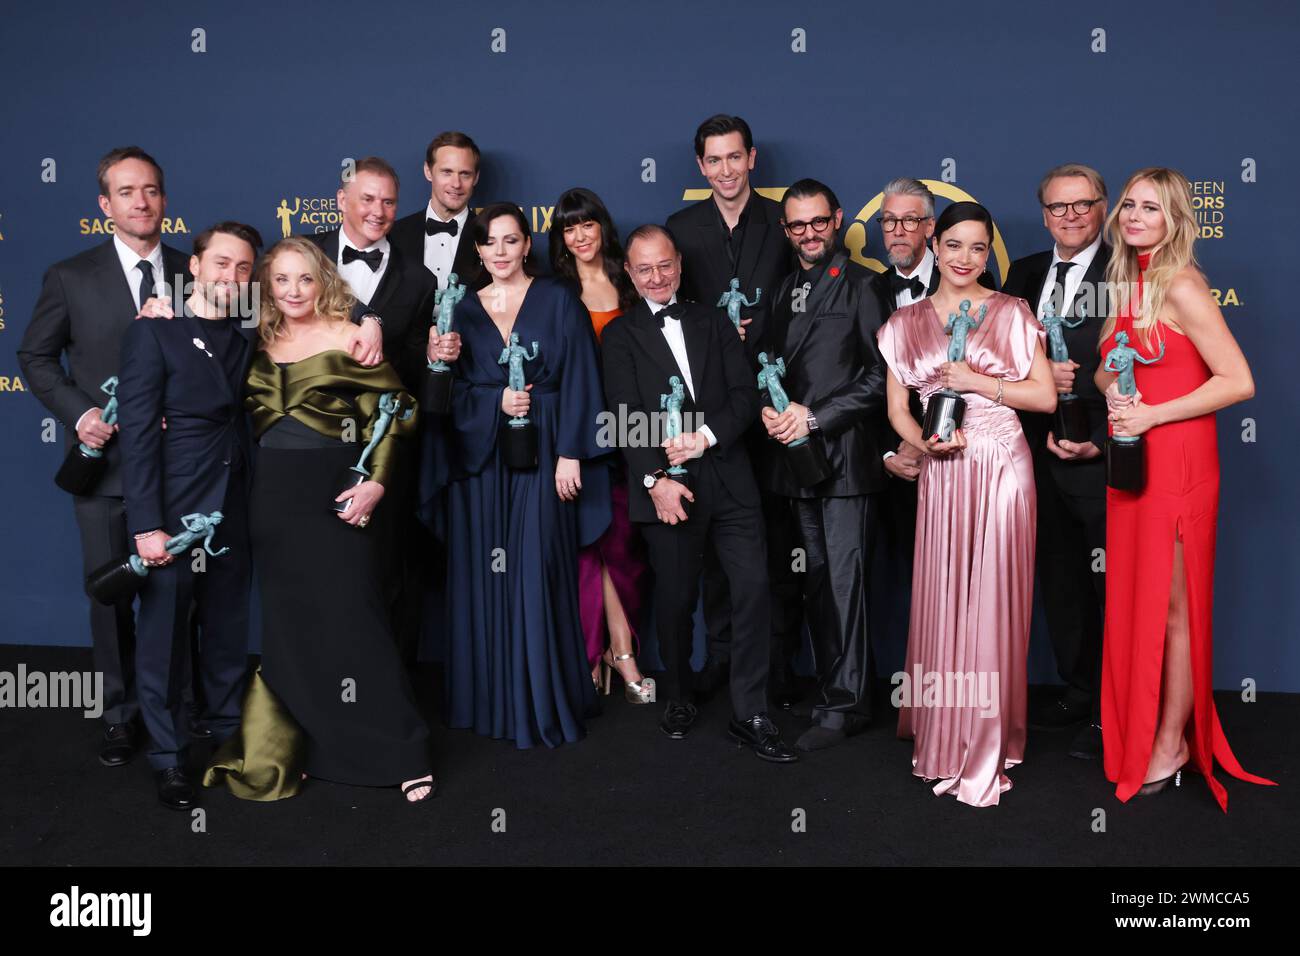 LOS ANGELES, CALIFORNIA - FEBRUARY 24: (L-R) Matthew Macfadyen, Kieran Culkin, J. Smith-Cameron, Scott Nicholson, Alexander Skarsgård, Dagmara Dominczyk, Zoe Winters, Fisher Stevens, Nicholas Braun, Arian Moayed, Alan Ruck, Juliana Canfield, David Rasche and Justine Lupe, winners of the Outstanding Performance by an Ensemble in a Drama Series award for 'Succession' pose in the press room during the 30th Annual Screen Actors Guild Awards at Shrine Auditorium and Expo Hall on February 24, 2024 in Los Angeles, California. Photo: CraSH/imageSPACE Stock Photo